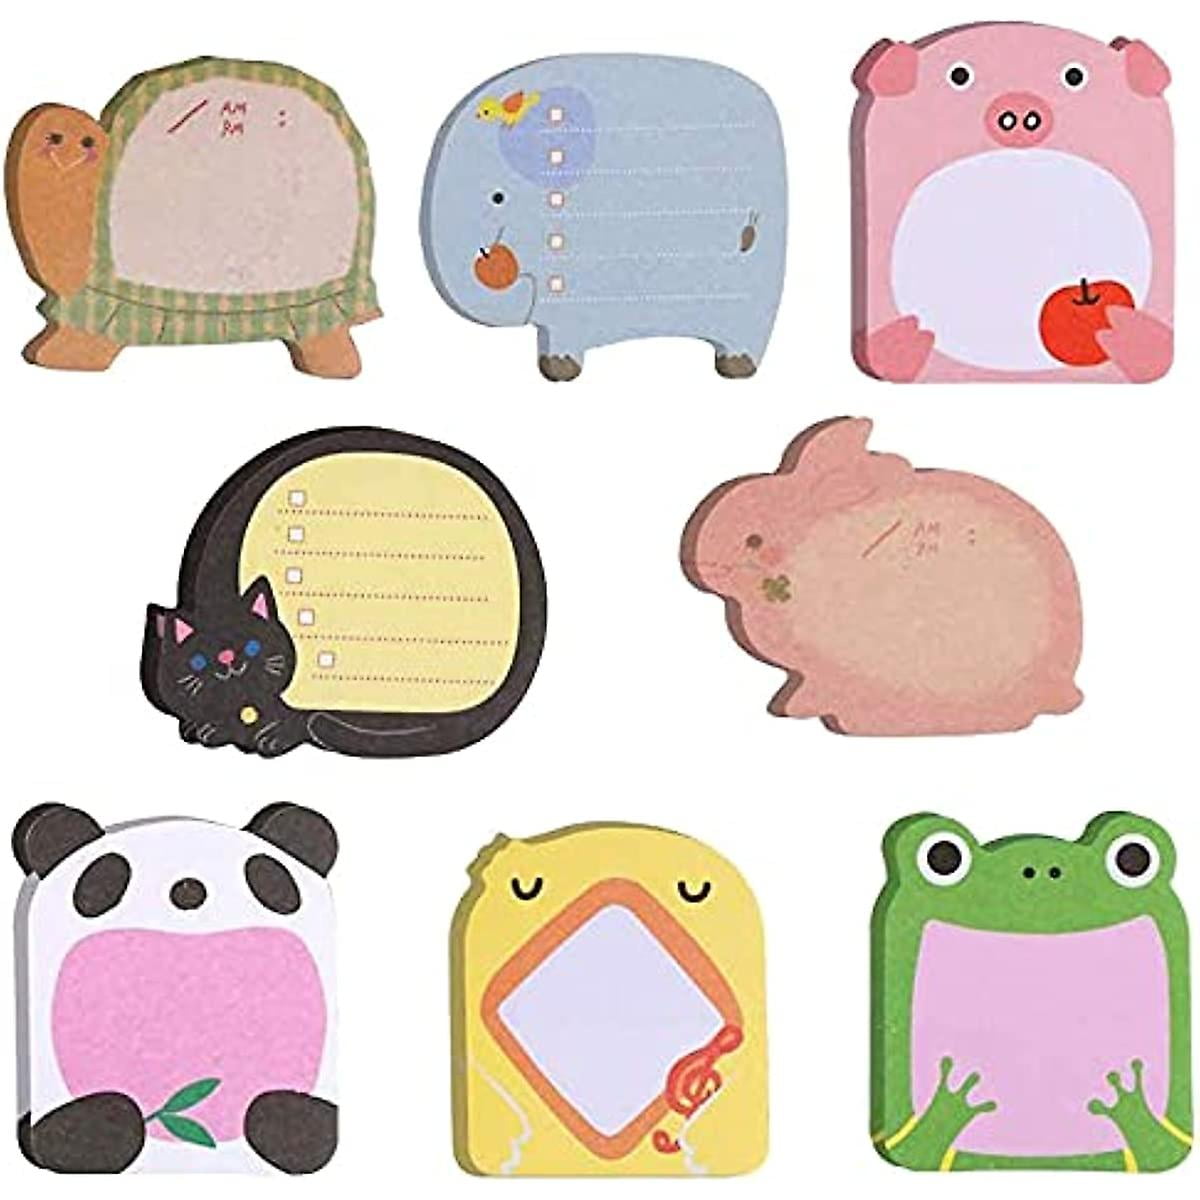 40 Packets Cute Animals Sticky Notes Cute Sticky Notes Set Mini Sticky Notes  Set Refrigerator Sticky Notes Cartoon Message Note For School Office Memo |  Walmart Canada